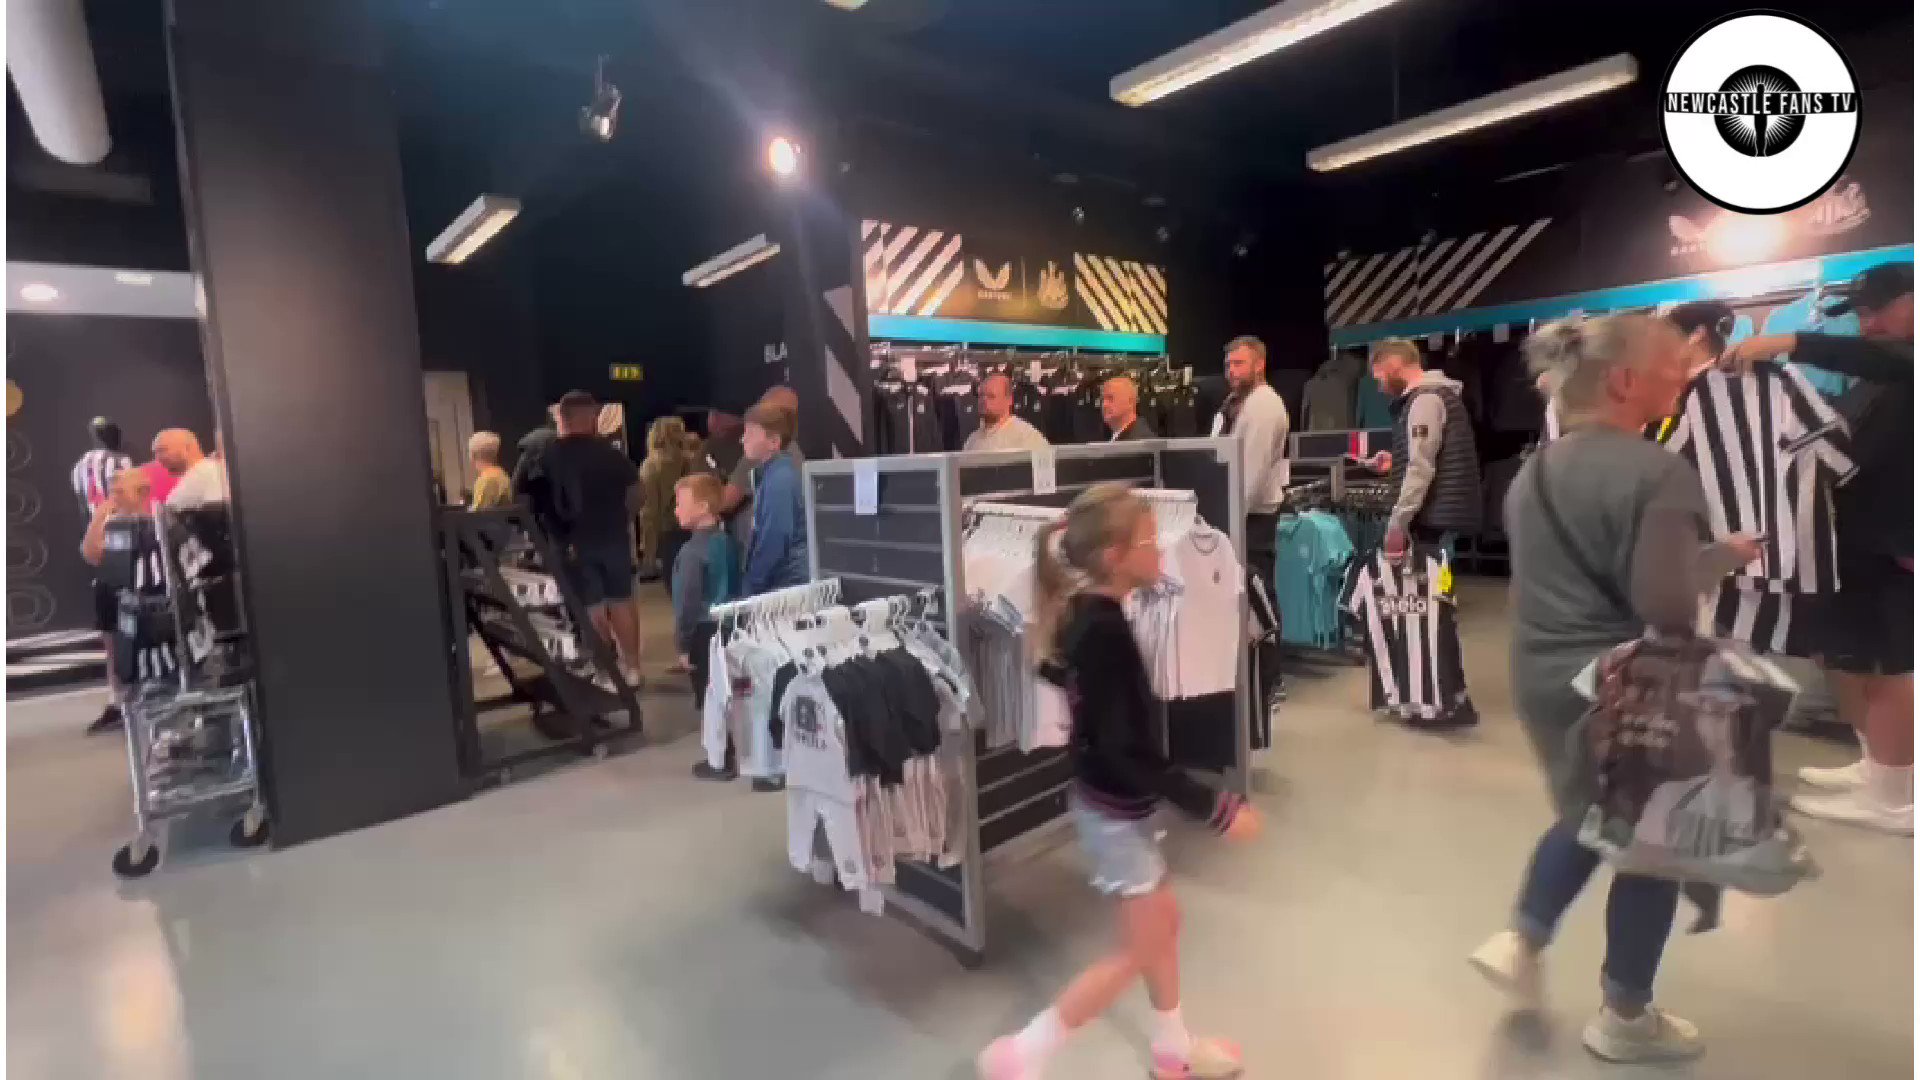 Newcastle Fans TV on Twitter: "Fair to say there's a bit of queue at the club shop this morning for the new #NUFC home shirt https://t.co/rIVXlwQwv1" / Twitter